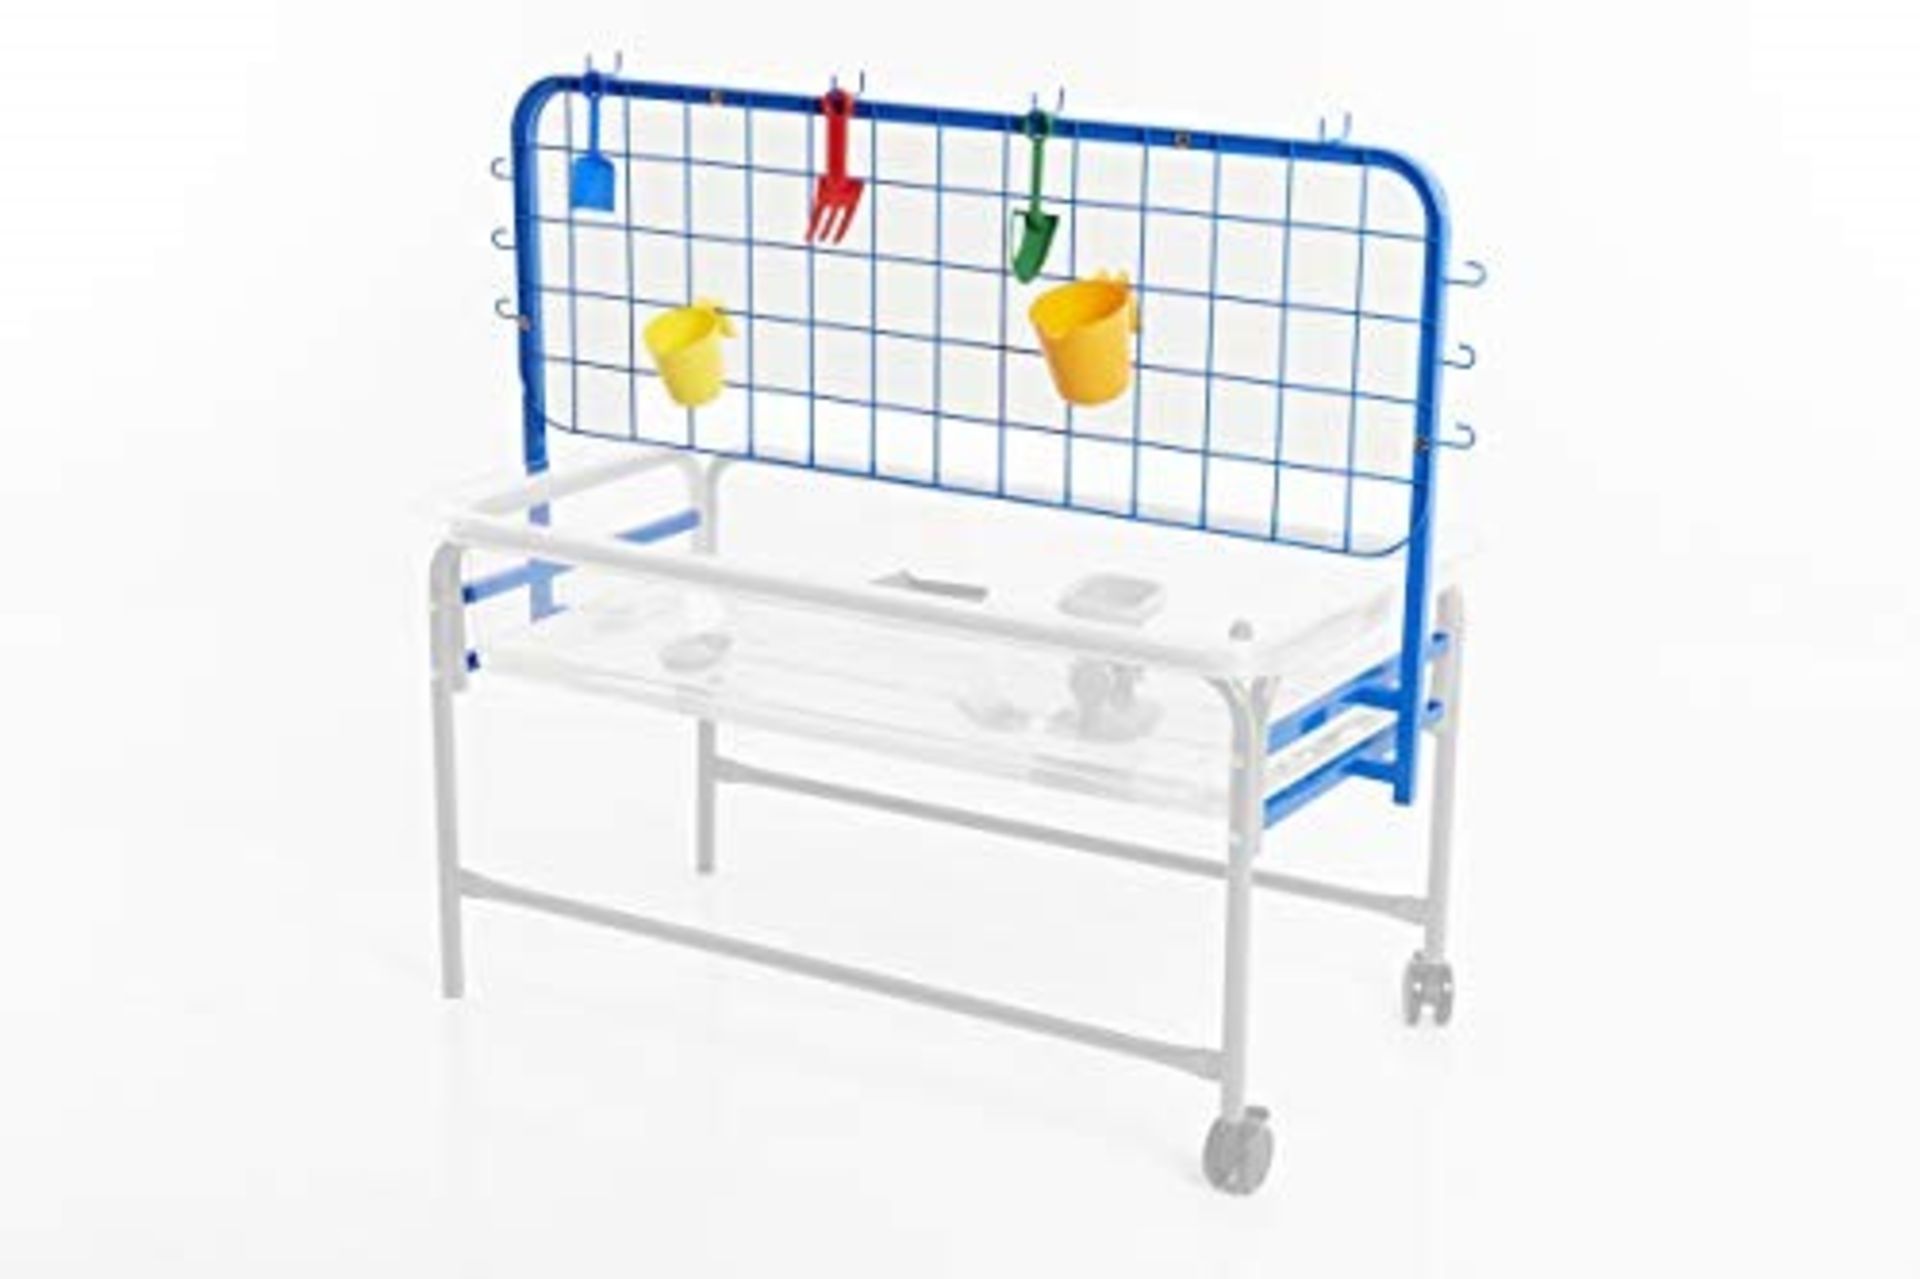 RRP £71.00 edx education 72308 Water Play Activity Rack for Sand & Water Tray